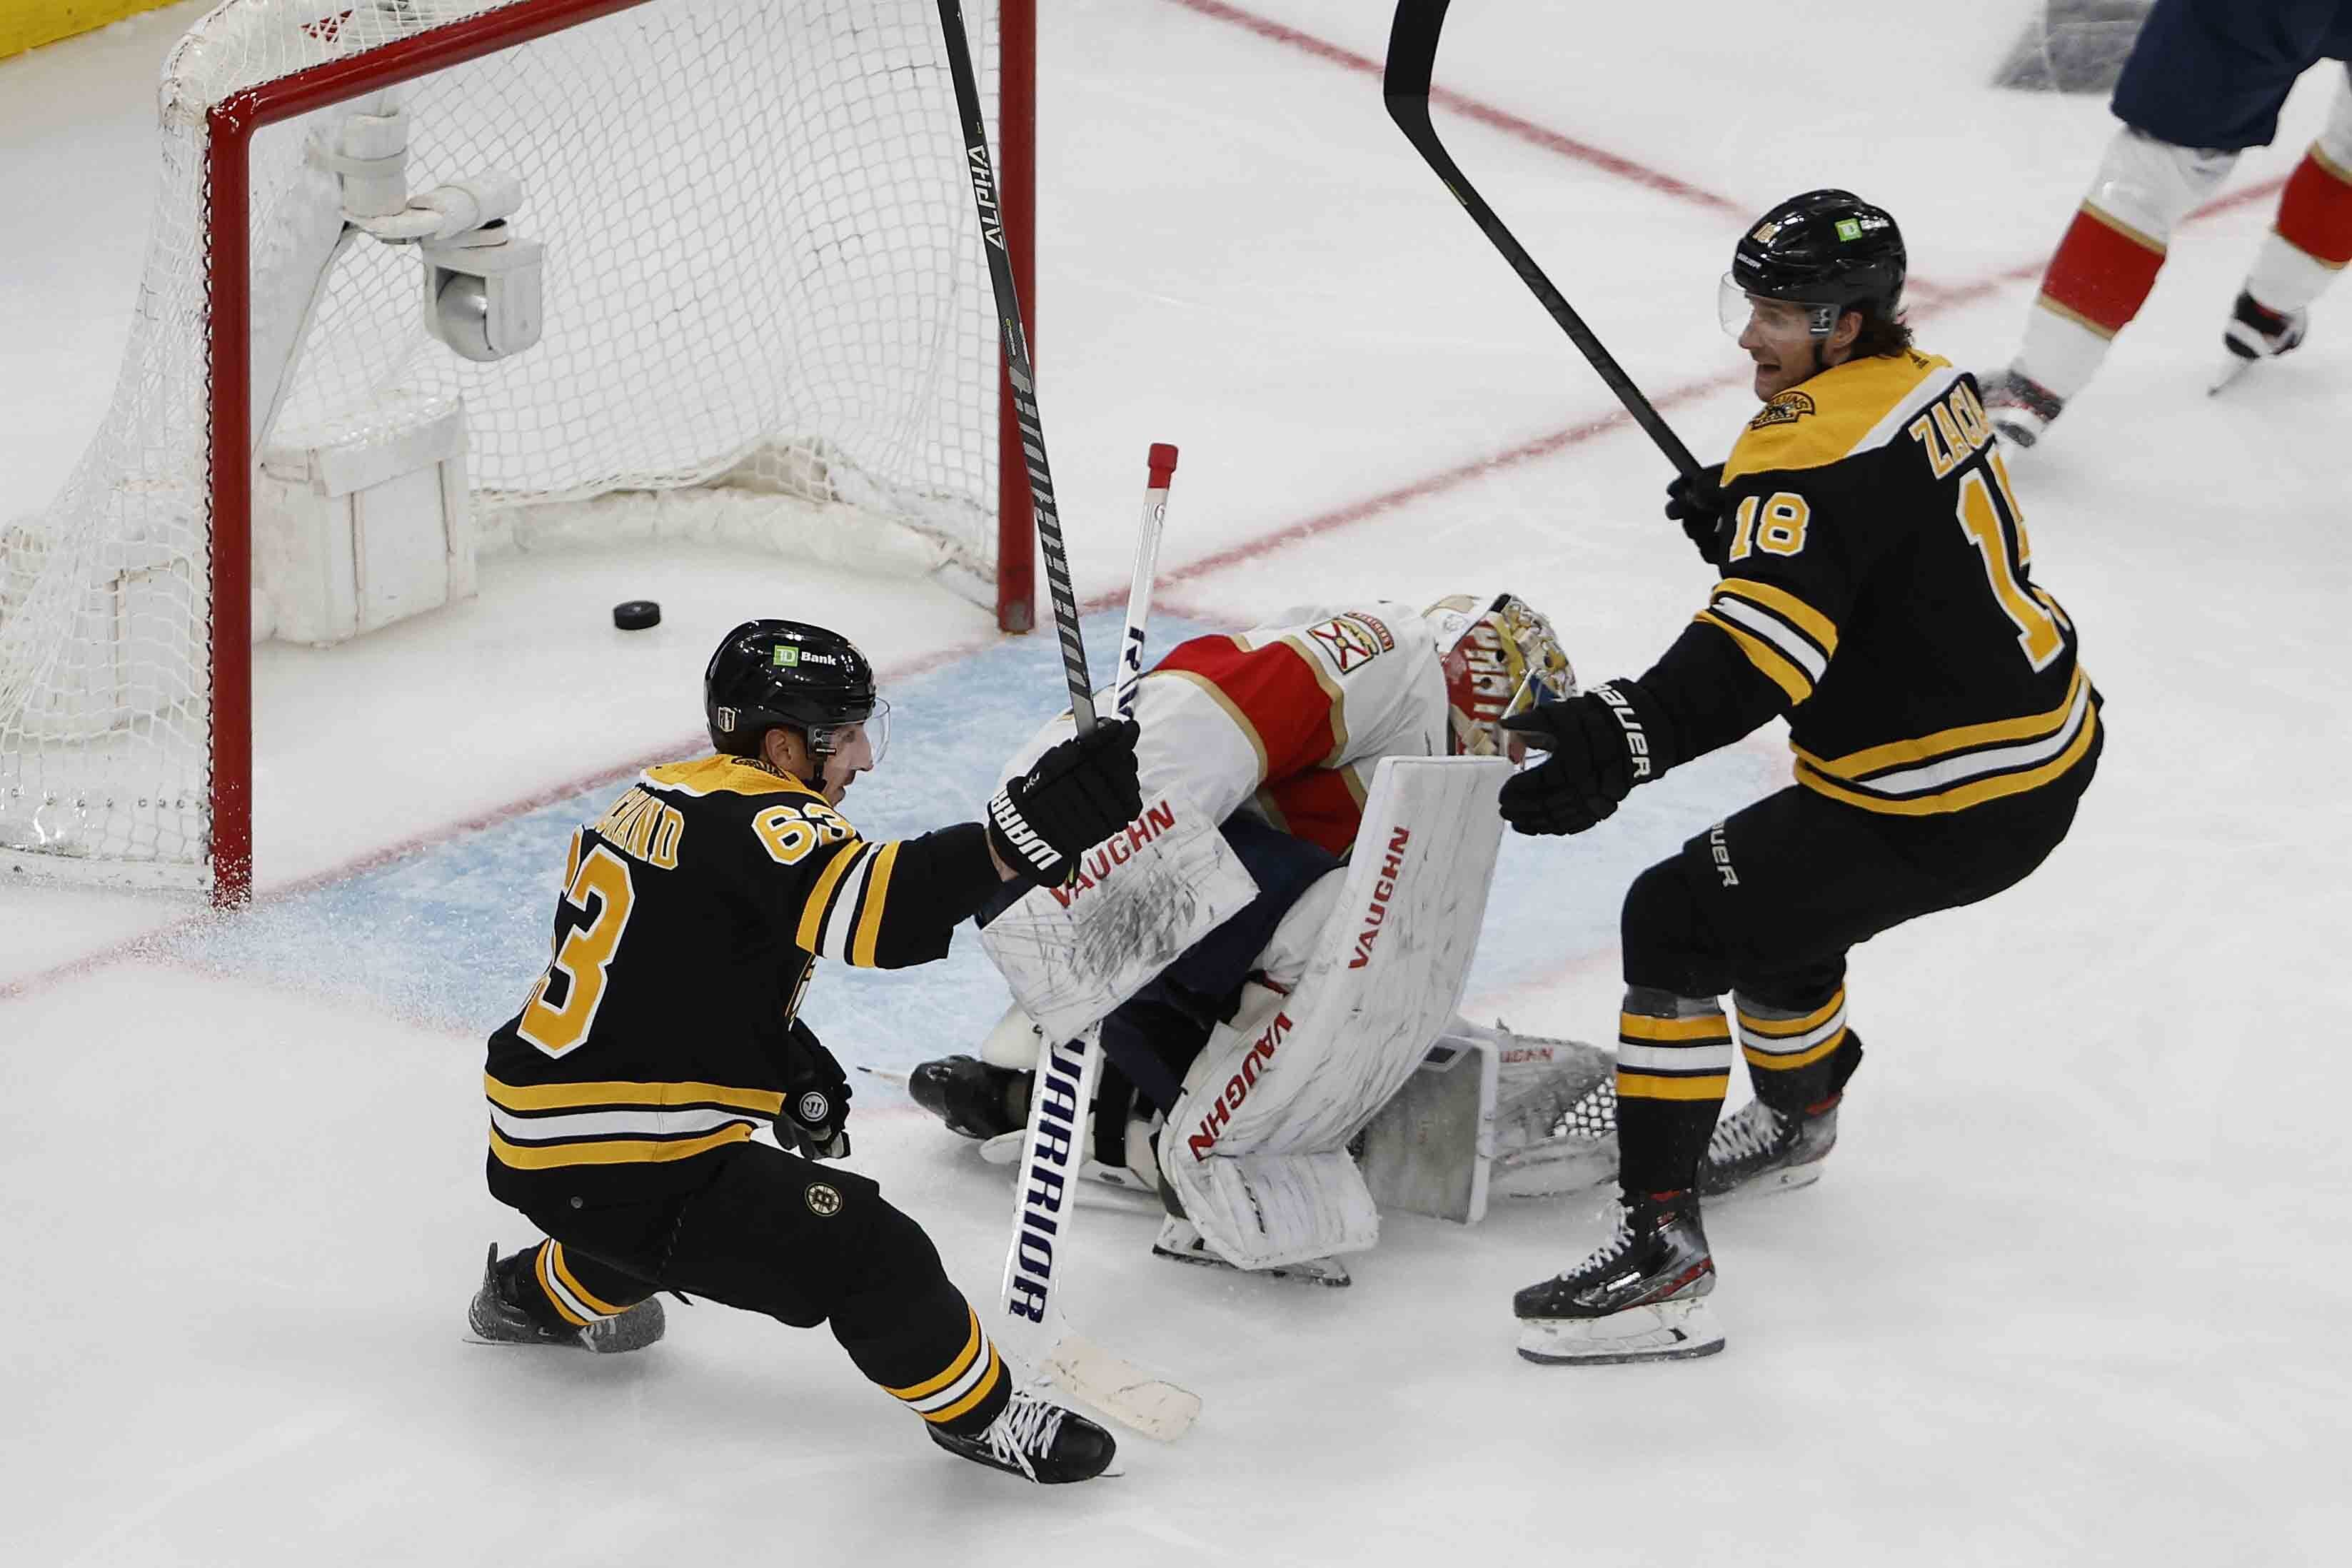 NHL playoff standings update: Bruins, Penguins look to bounce